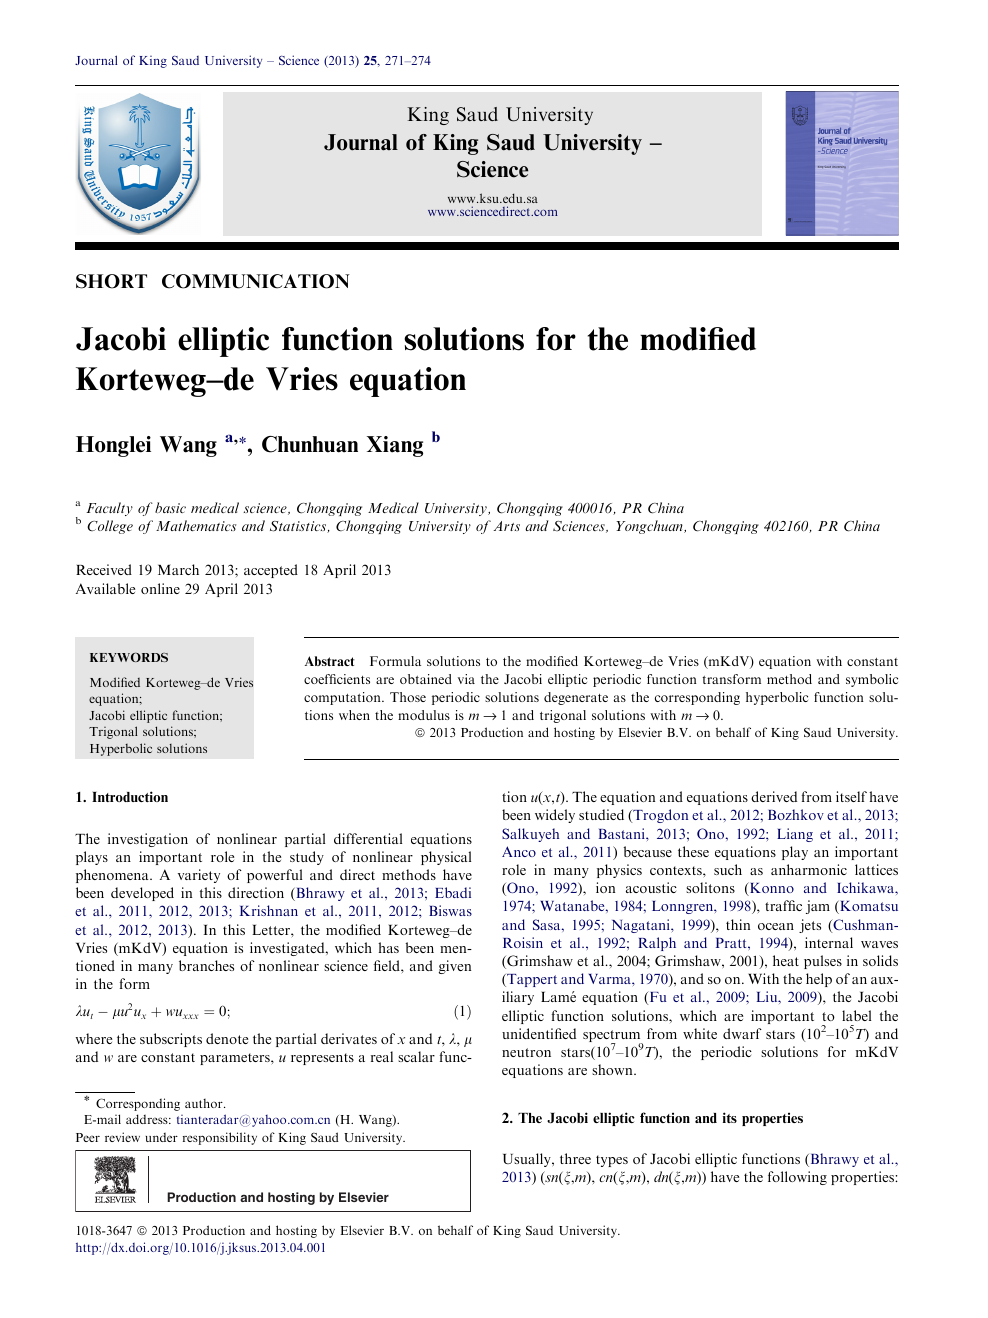 Jacobi Elliptic Function Solutions For The Modified Korteweg De Vries Equation Topic Of Research Paper In Physical Sciences Download Scholarly Article Pdf And Read For Free On Cyberleninka Open Science Hub